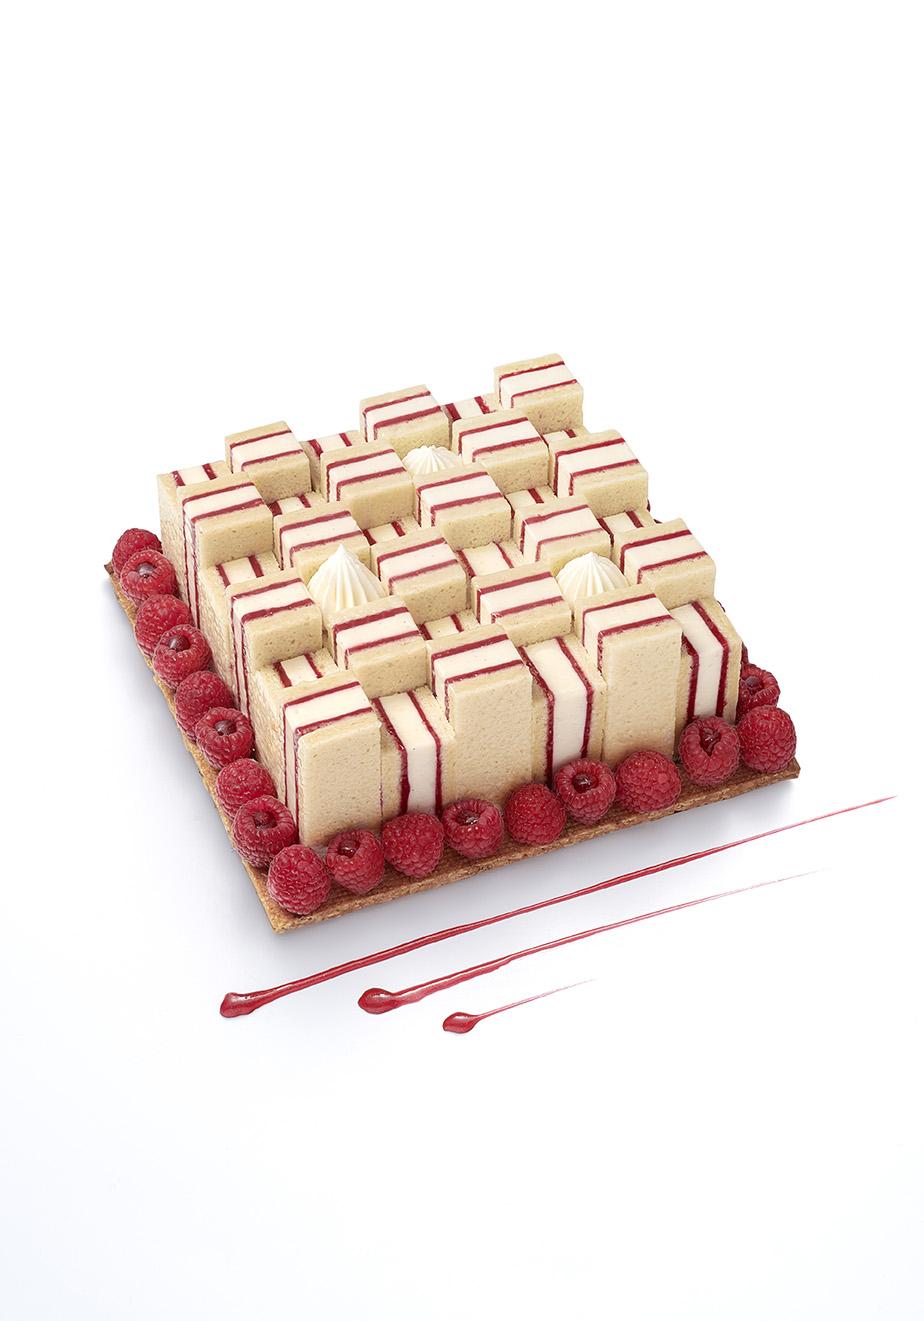 Professionnel - 2.0 Vire RASPBERRY CAKE & bakery - Elle and Pastry